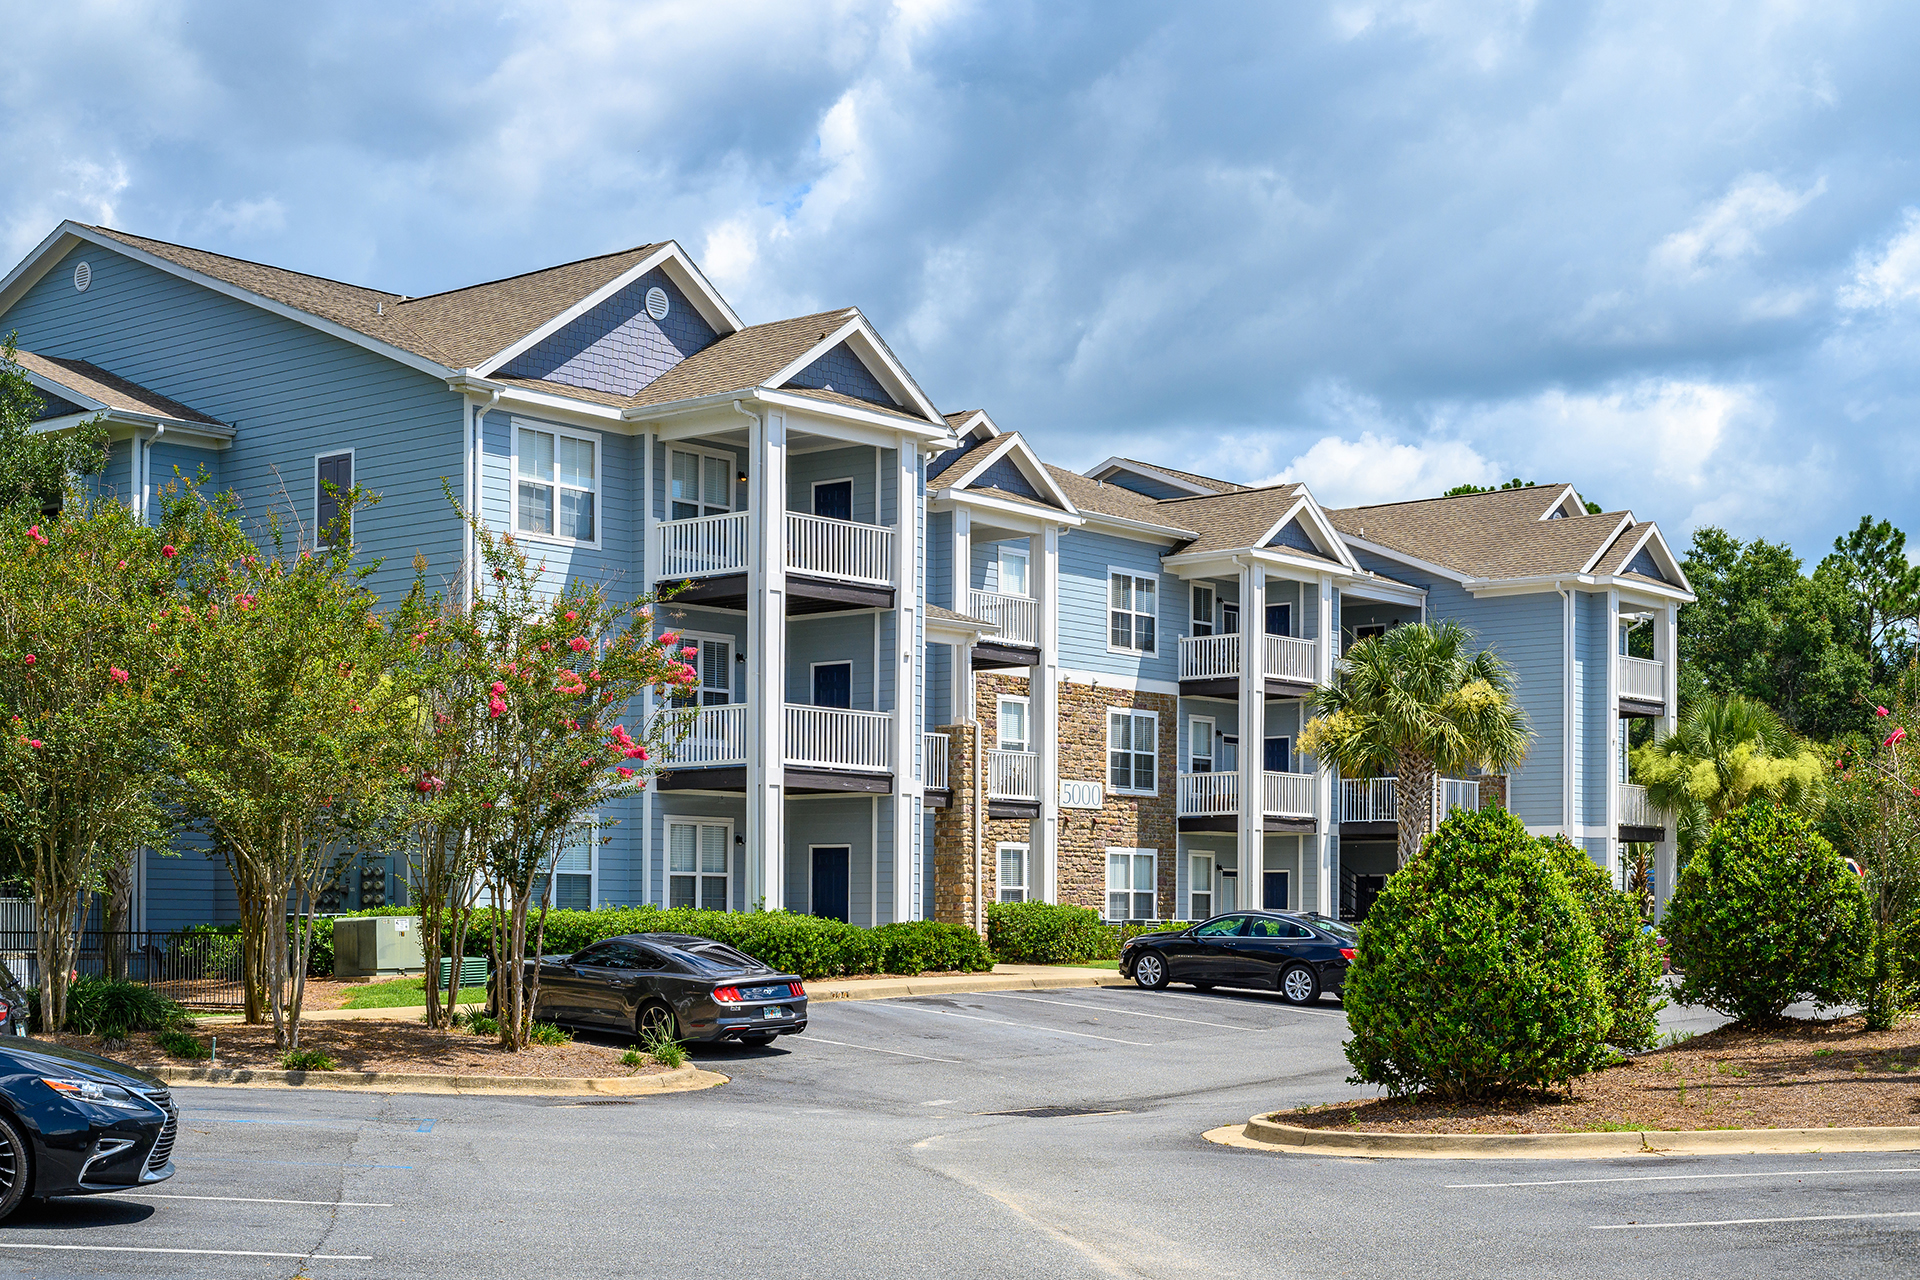 A row of multi-story apartment buildings with balconies, surrounded by trees and shrubbery, epitomizes prime Multi-Family Real Estate Investments. Several cars are parked in the spacious parking lot in the foreground under a partly cloudy sky.